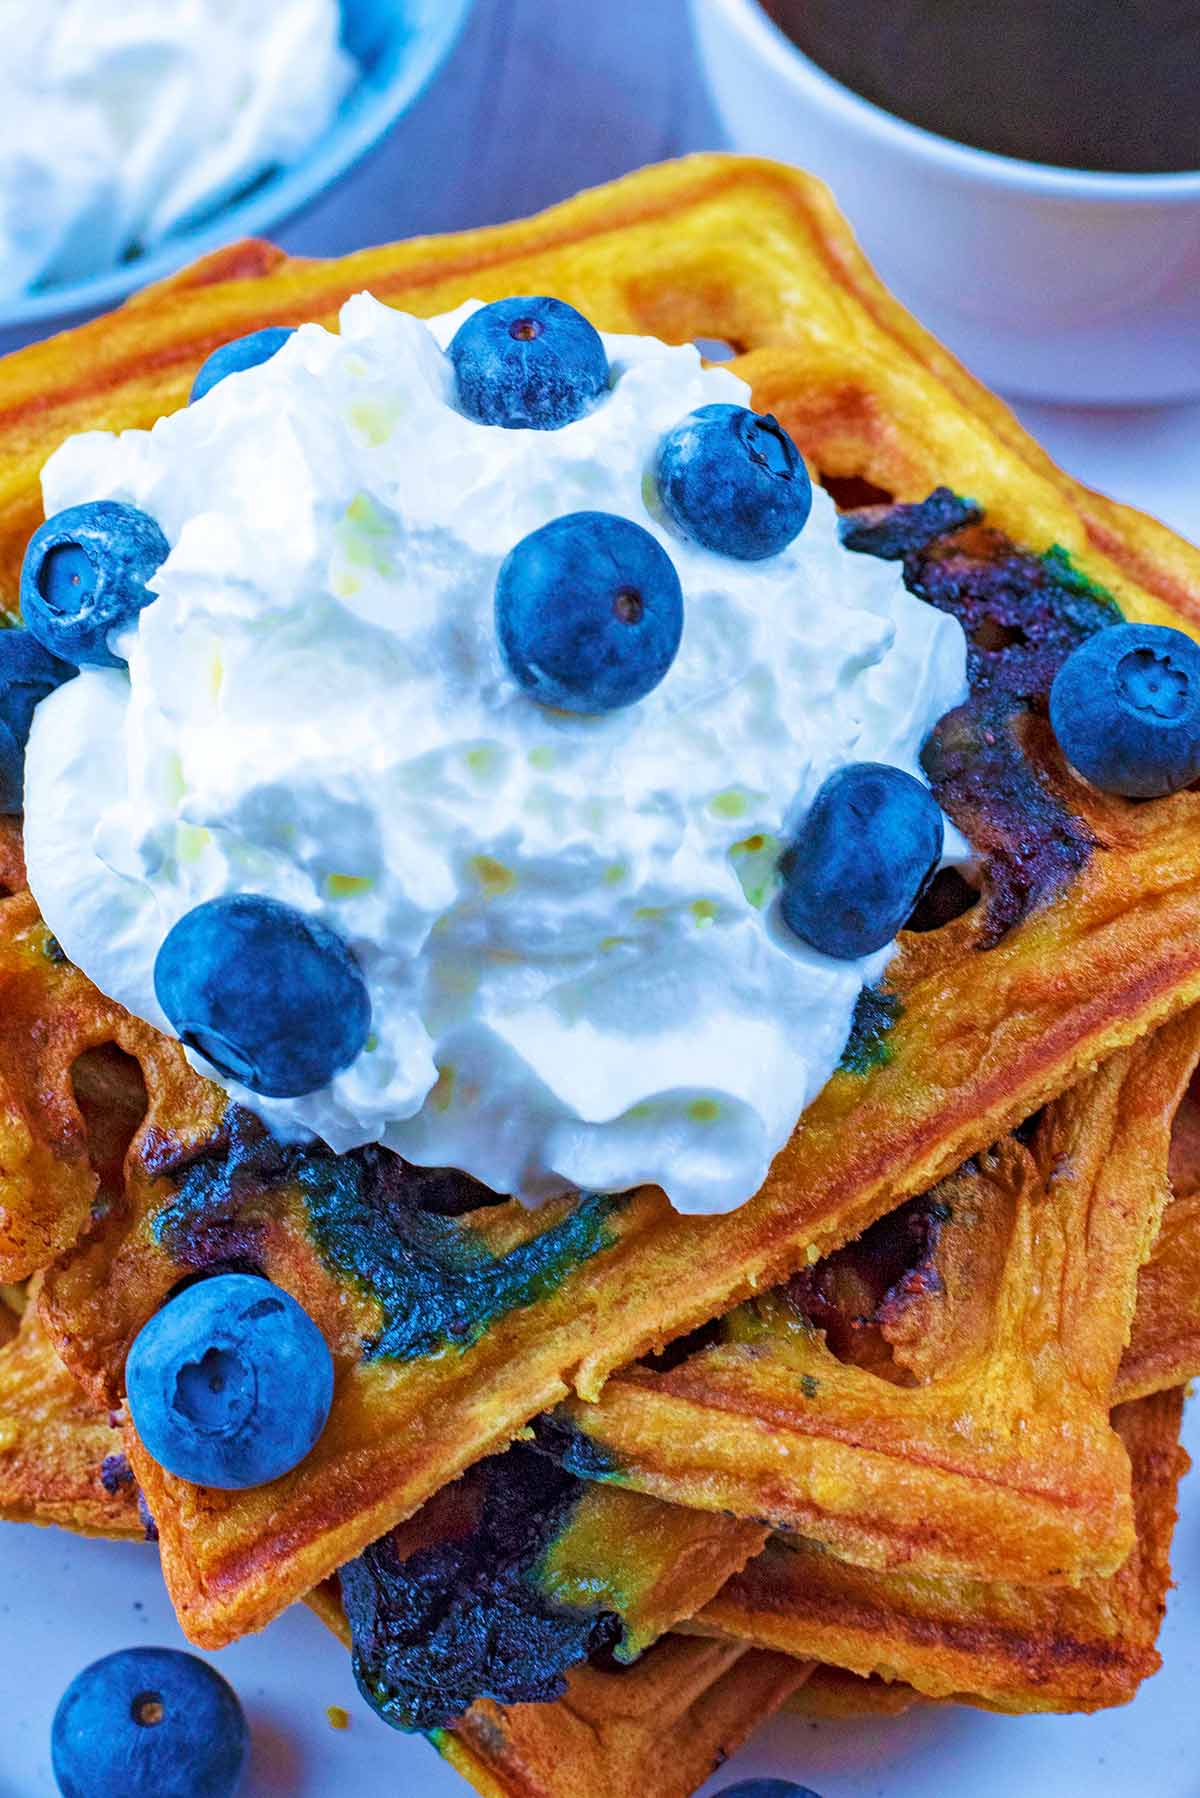 A stack of waffles with a dollop of cream and scattered blueberries.